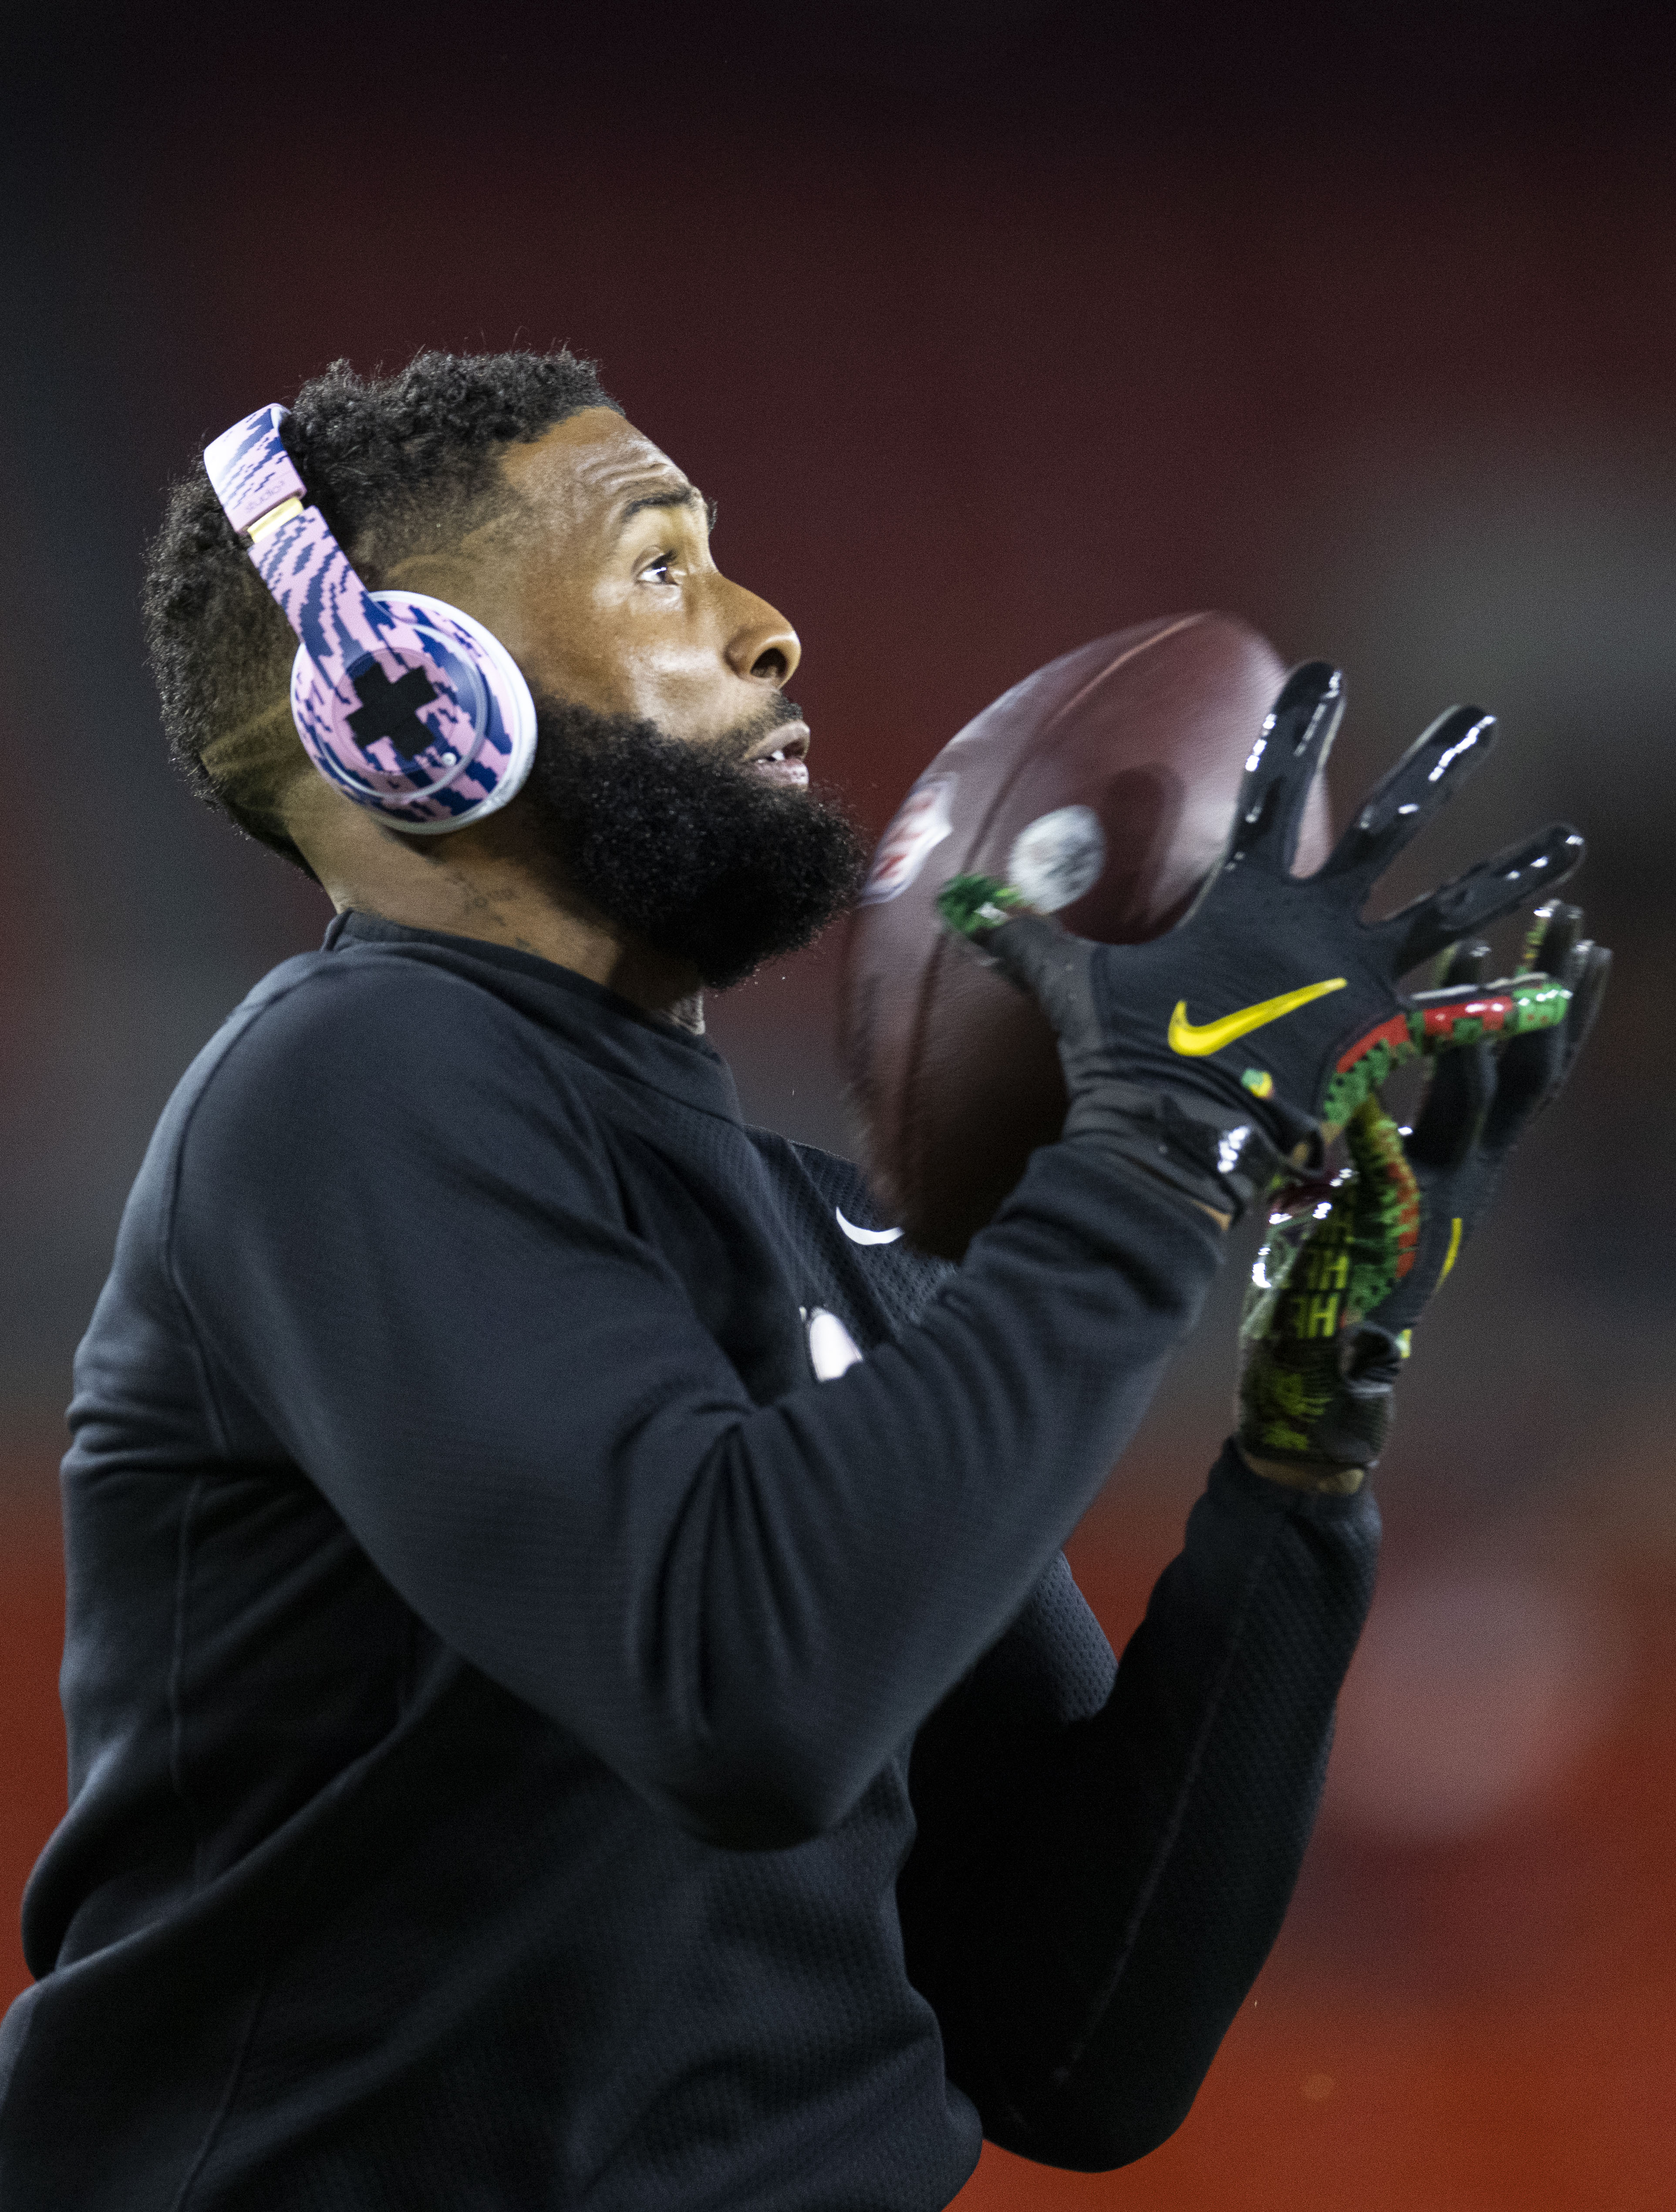 Jets offseason update: where things stand with OBJ, other free agents